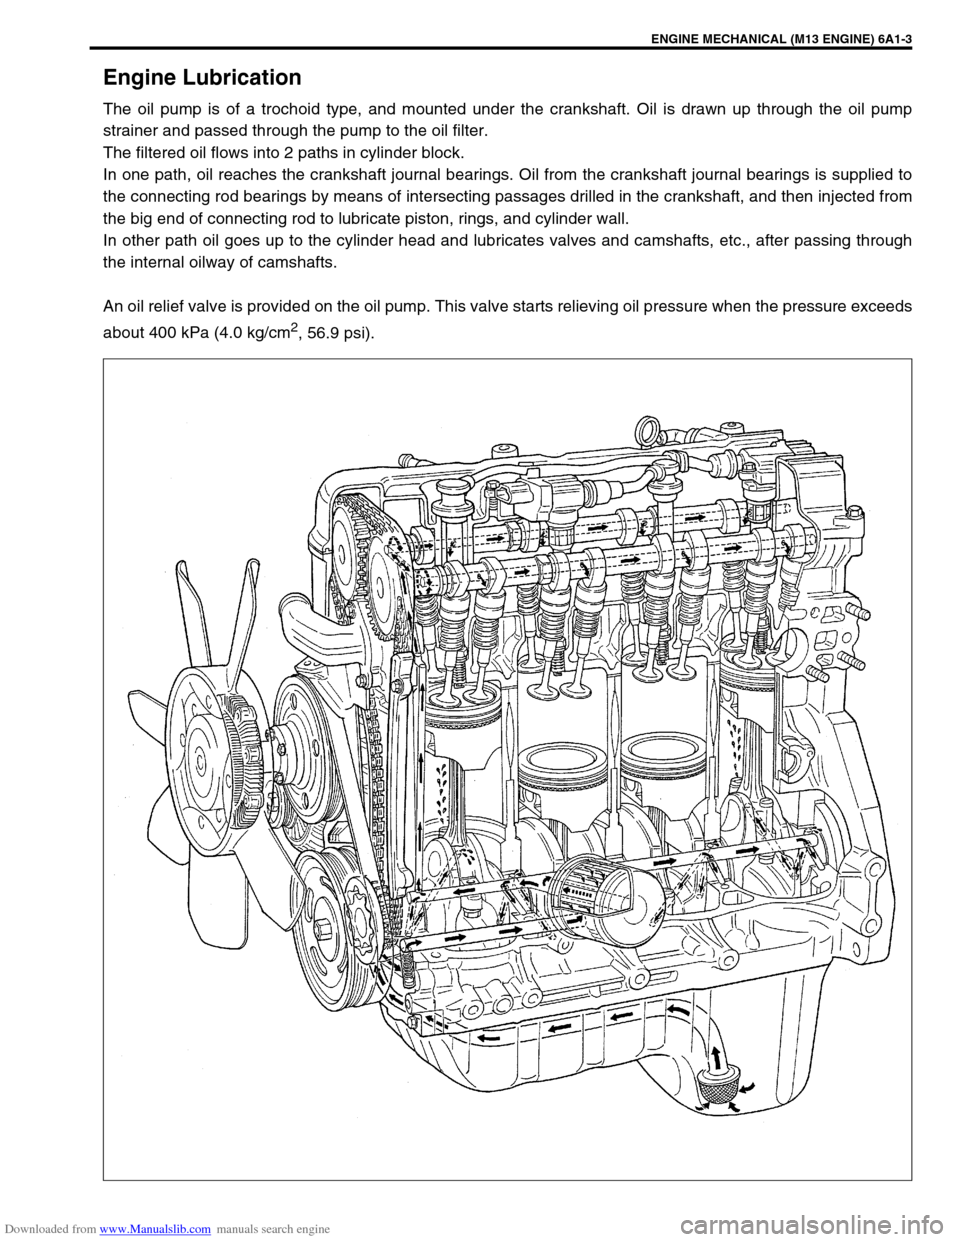 SUZUKI JIMNY 2005 3.G Service Workshop Manual Downloaded from www.Manualslib.com manuals search engine ENGINE MECHANICAL (M13 ENGINE) 6A1-3
Engine Lubrication
The oil pump is of a trochoid type, and mounted under the crankshaft. Oil is drawn up t